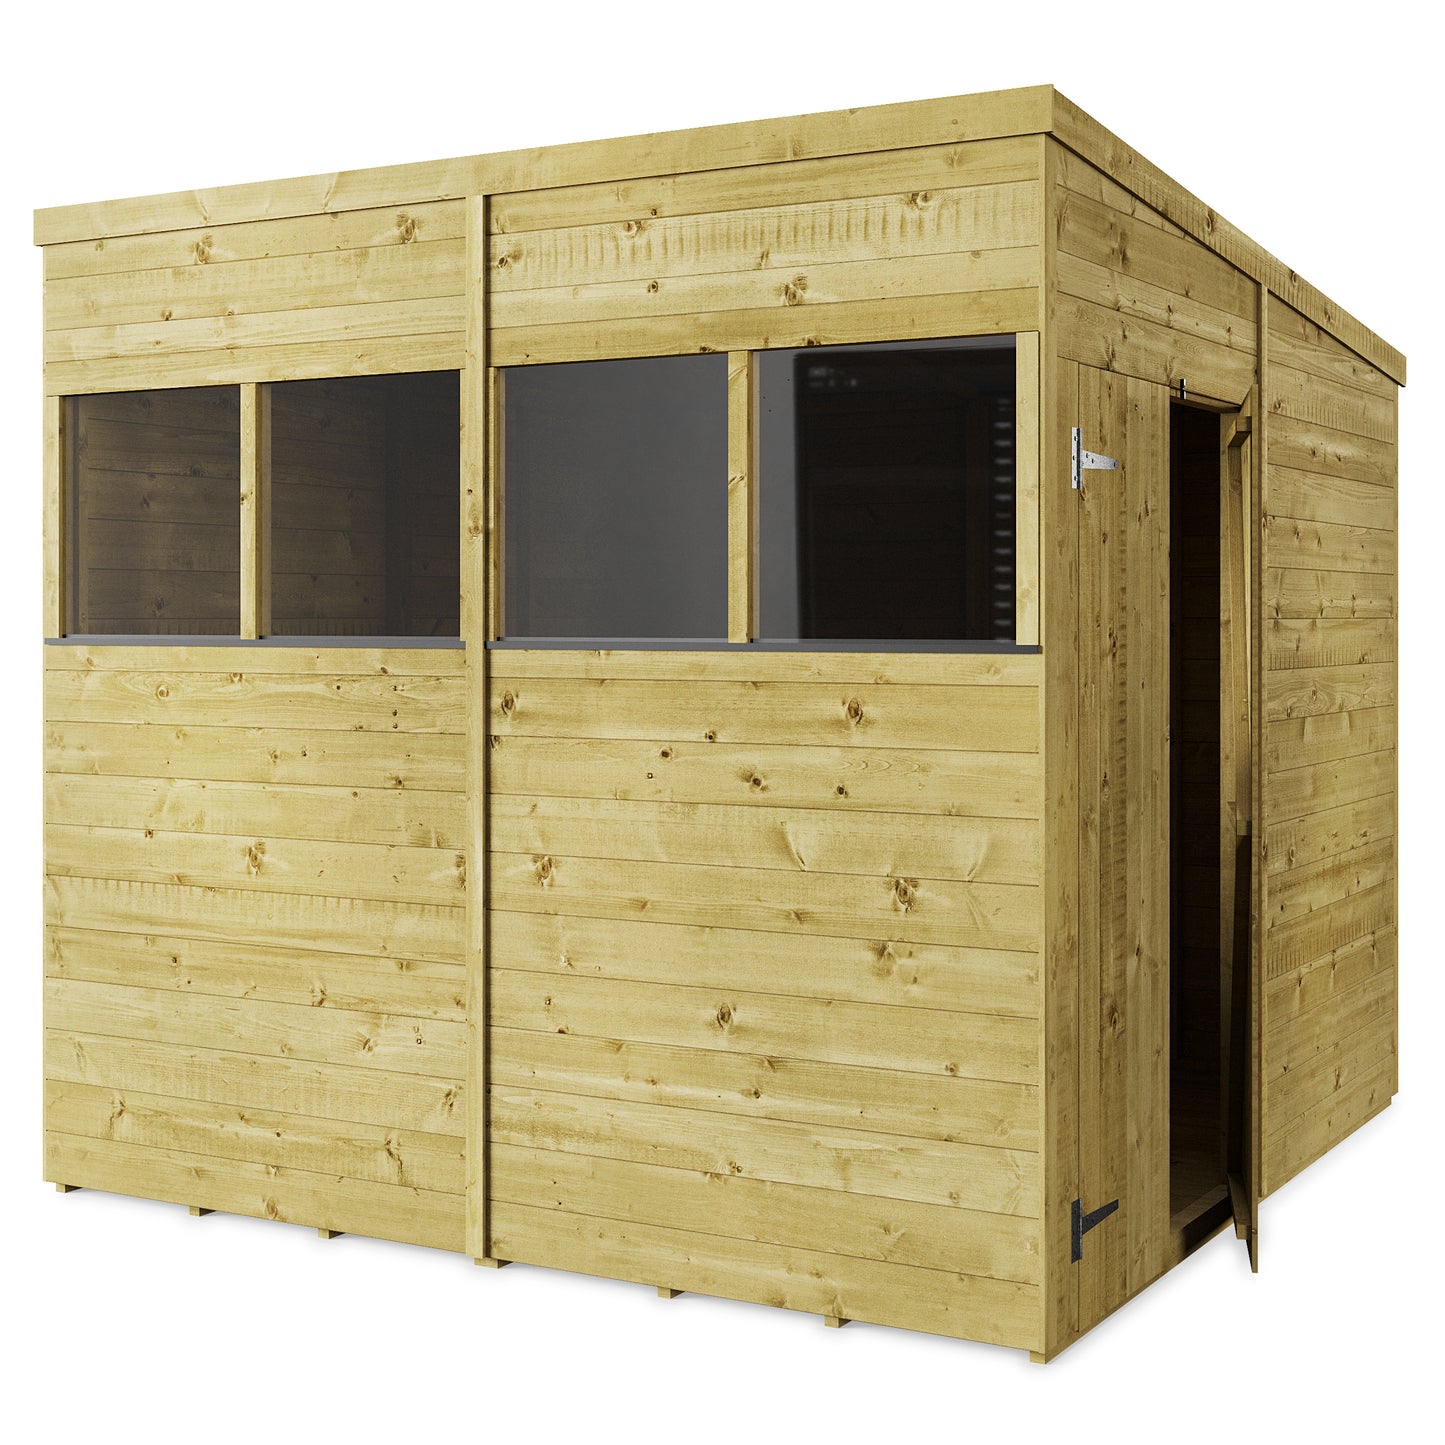 Store More 8 x 8 Tongue and Groove Pent Shed Windowed - Premium Garden